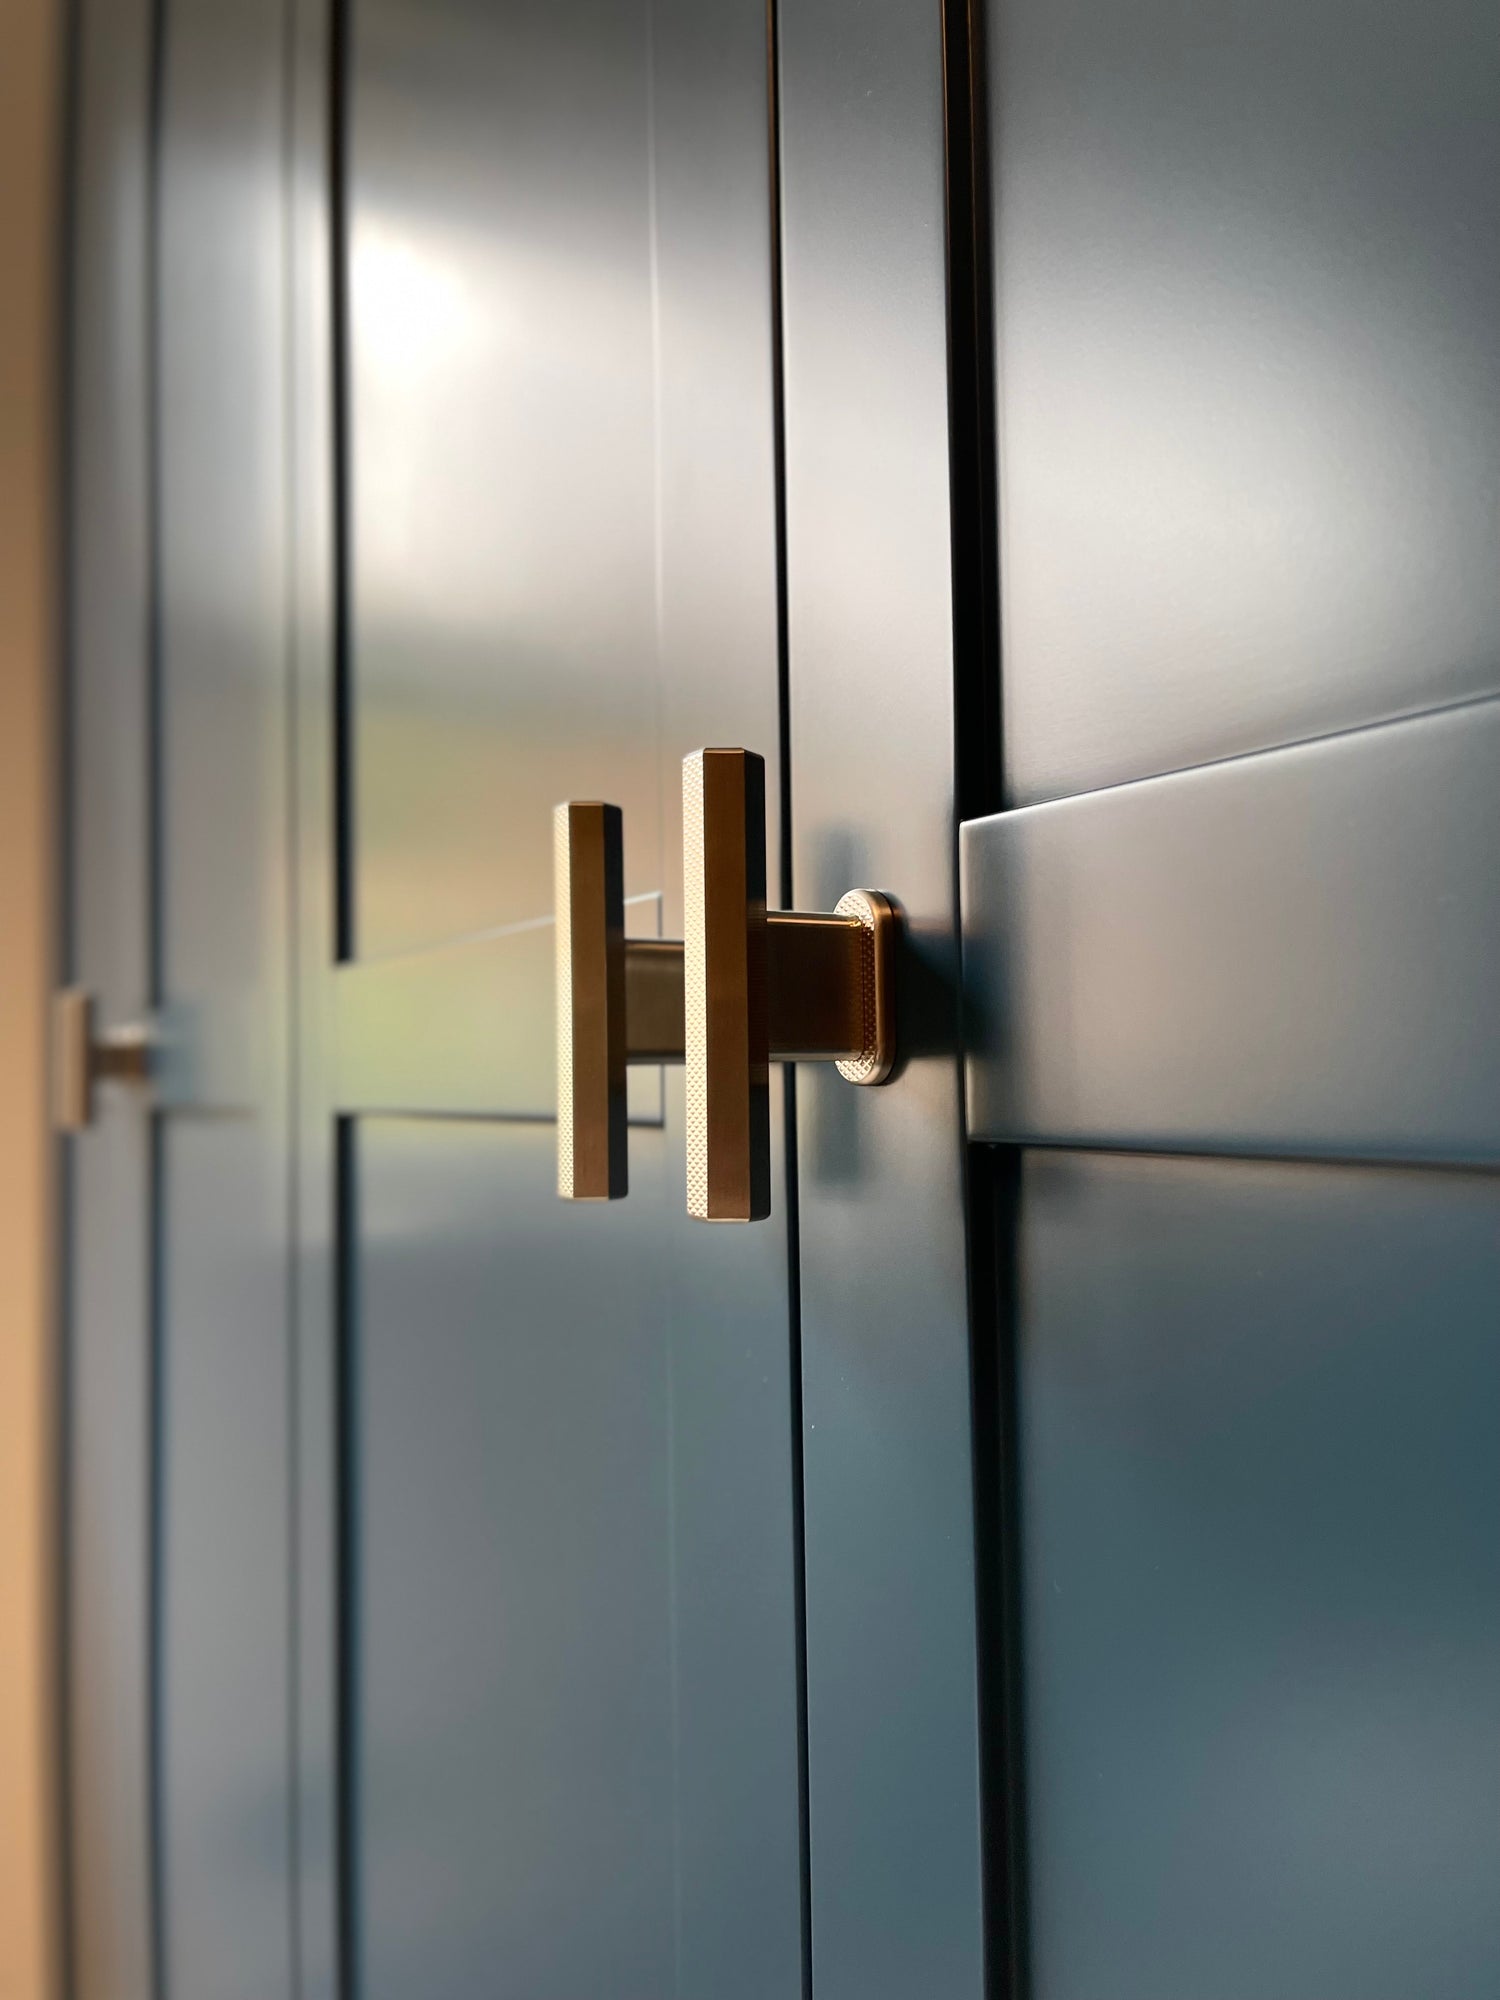 sennen polished brass t-bar handle pulls with hex knurling on dark blue wardrobe cabinetry 